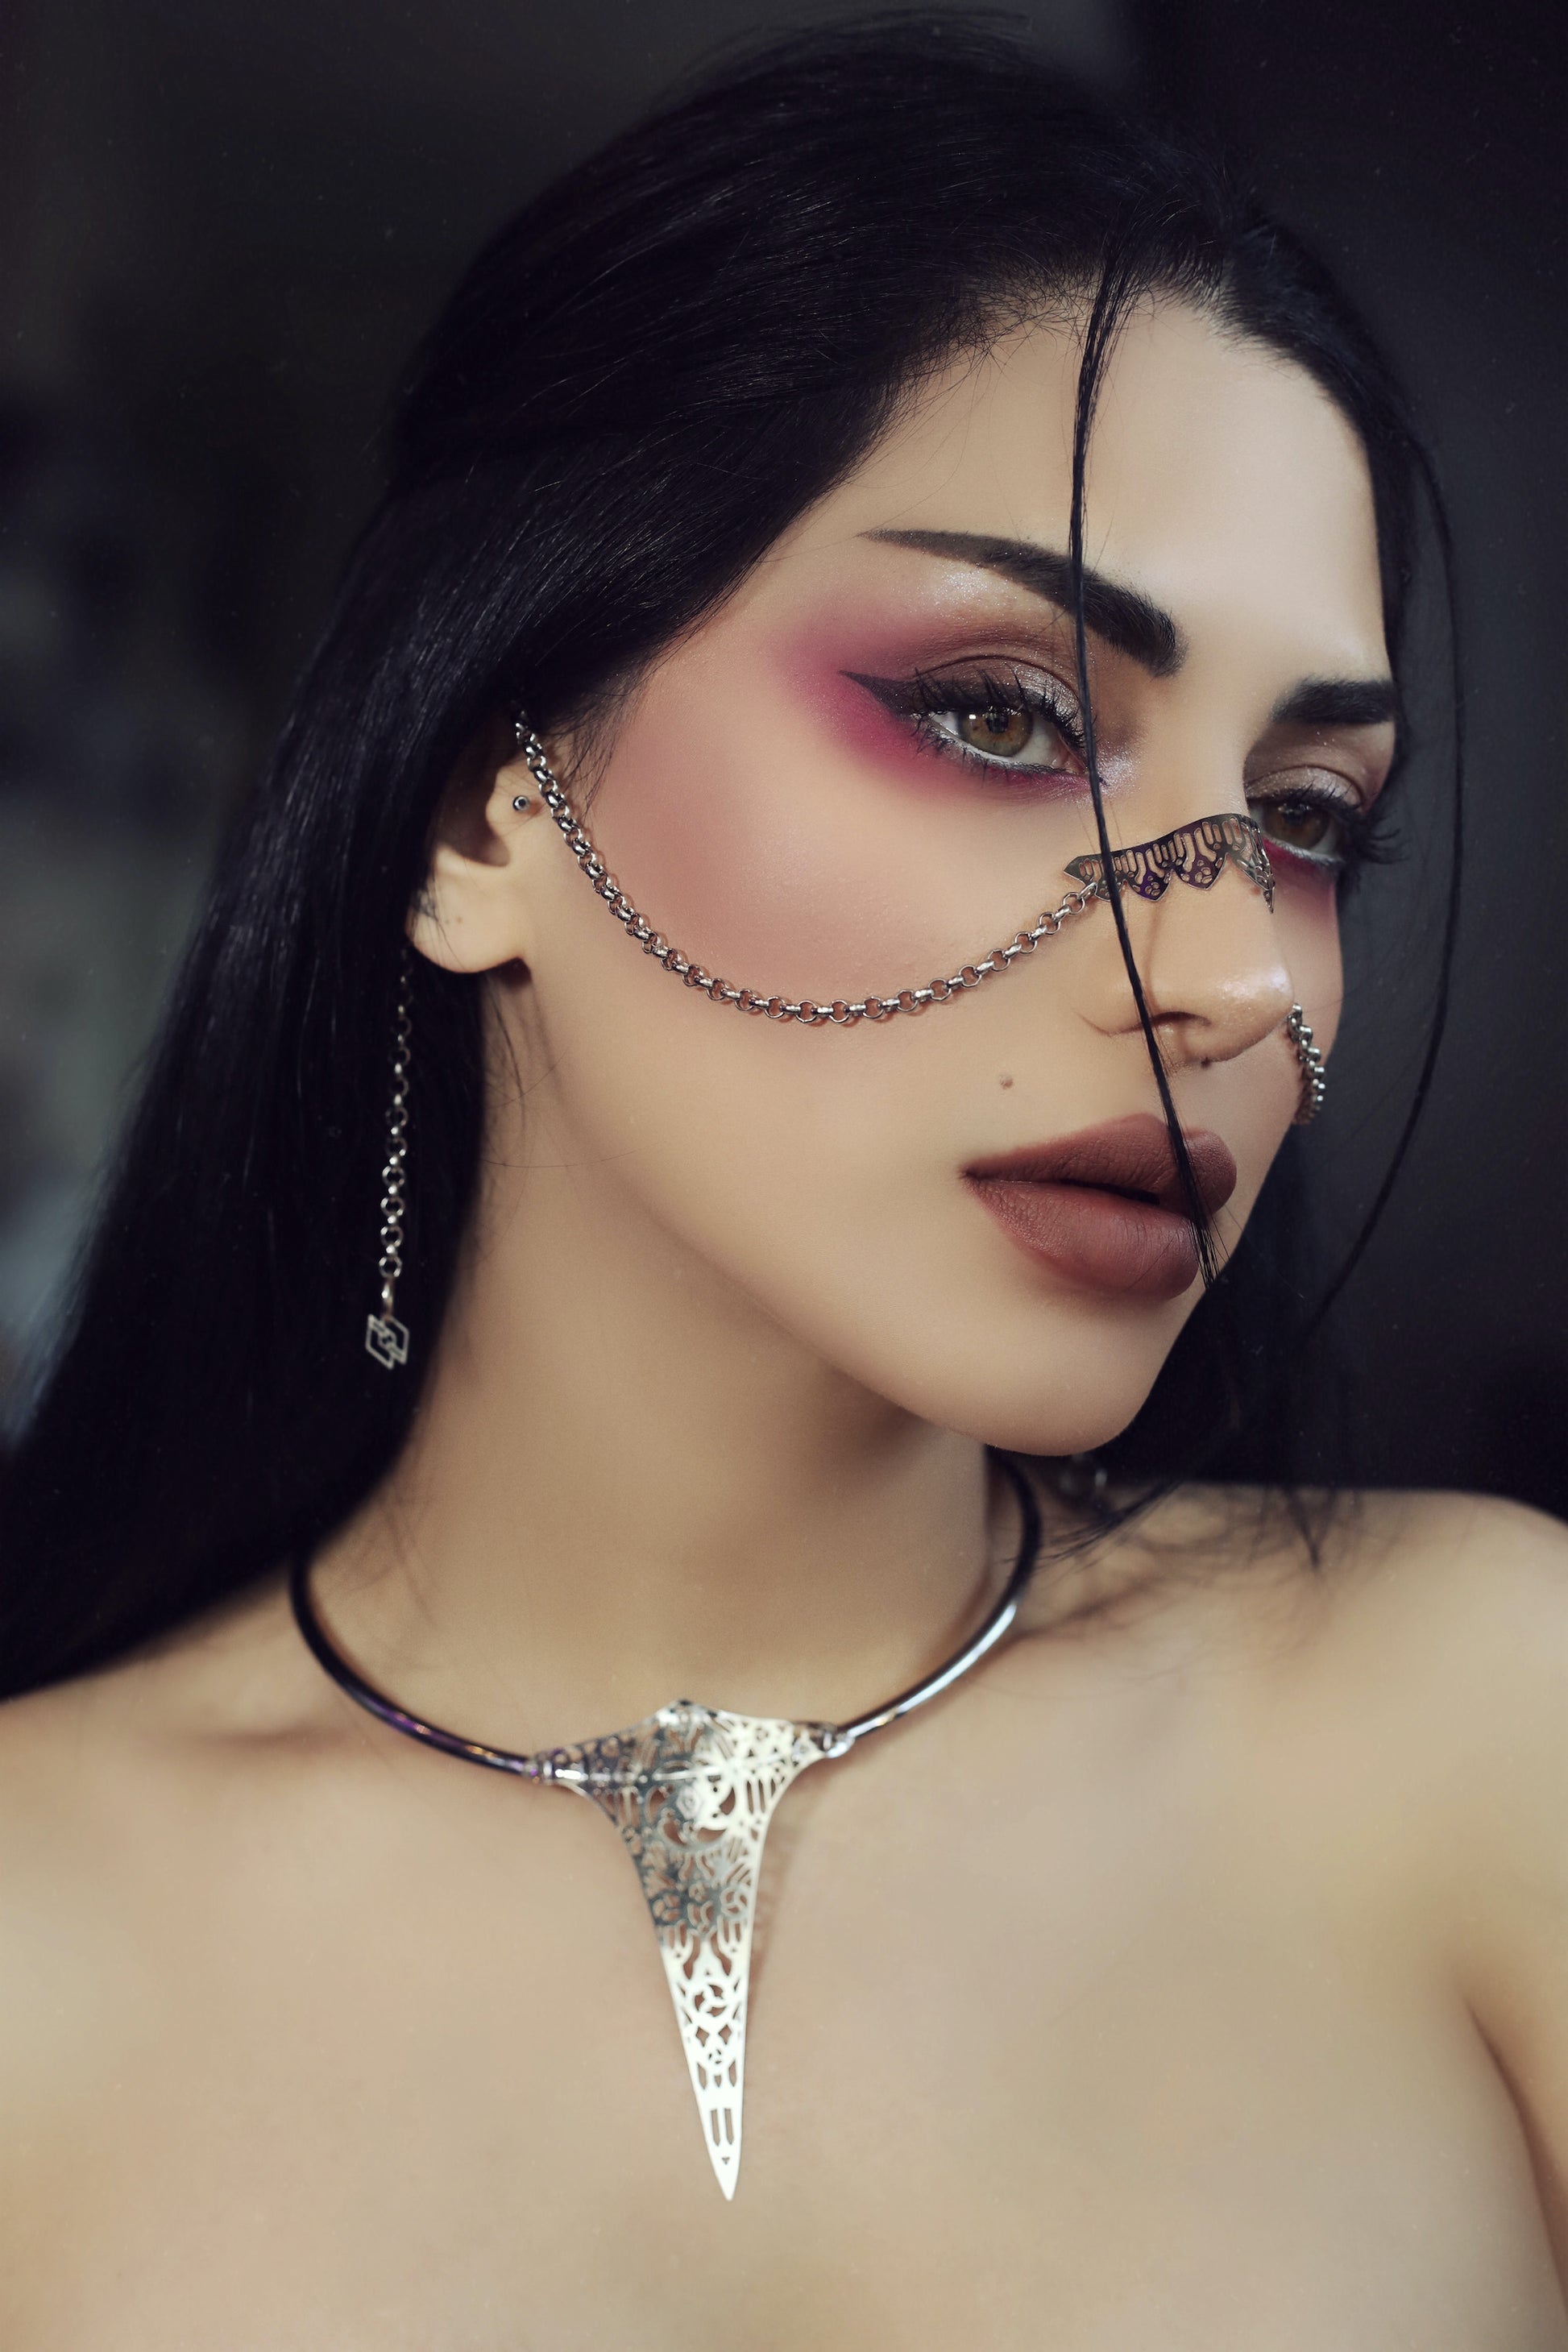 A model presents a Myril Jewels nose chain, accentuating a neo-goth aesthetic. This bold jewelry piece, perfect for goth girlfriend gifts, adds a witchcore touch to any outfit, ideal for Halloween, festival wear, or daily expression of gothic-chic style.